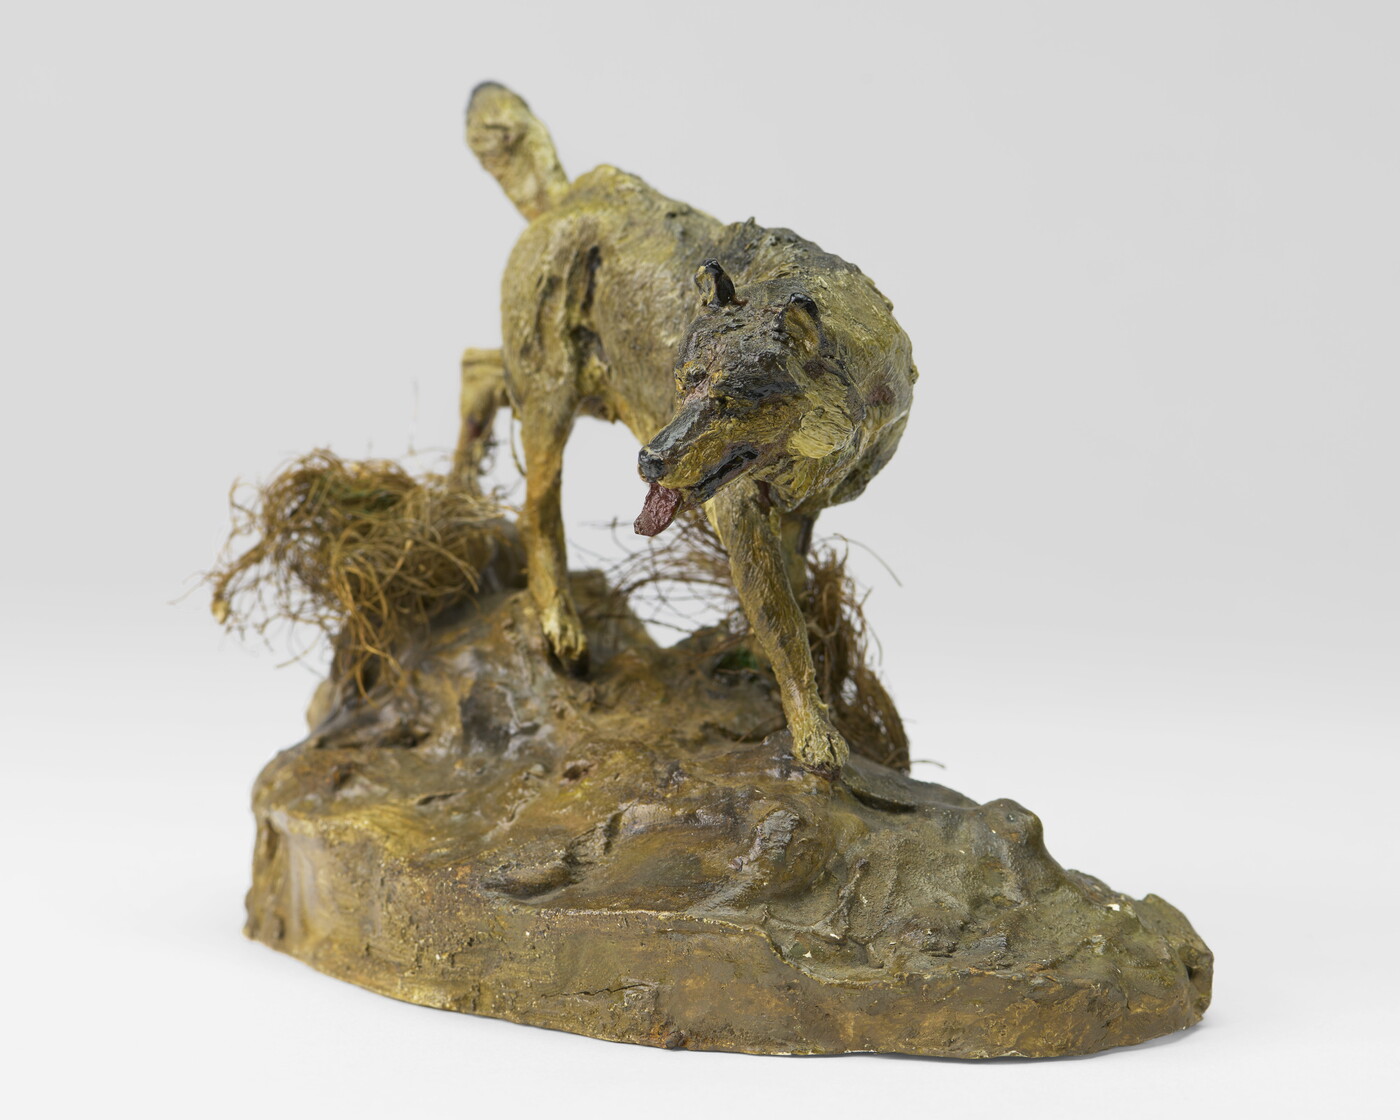 A painted sculpture of a wolf walking across patches of grass on a rock.